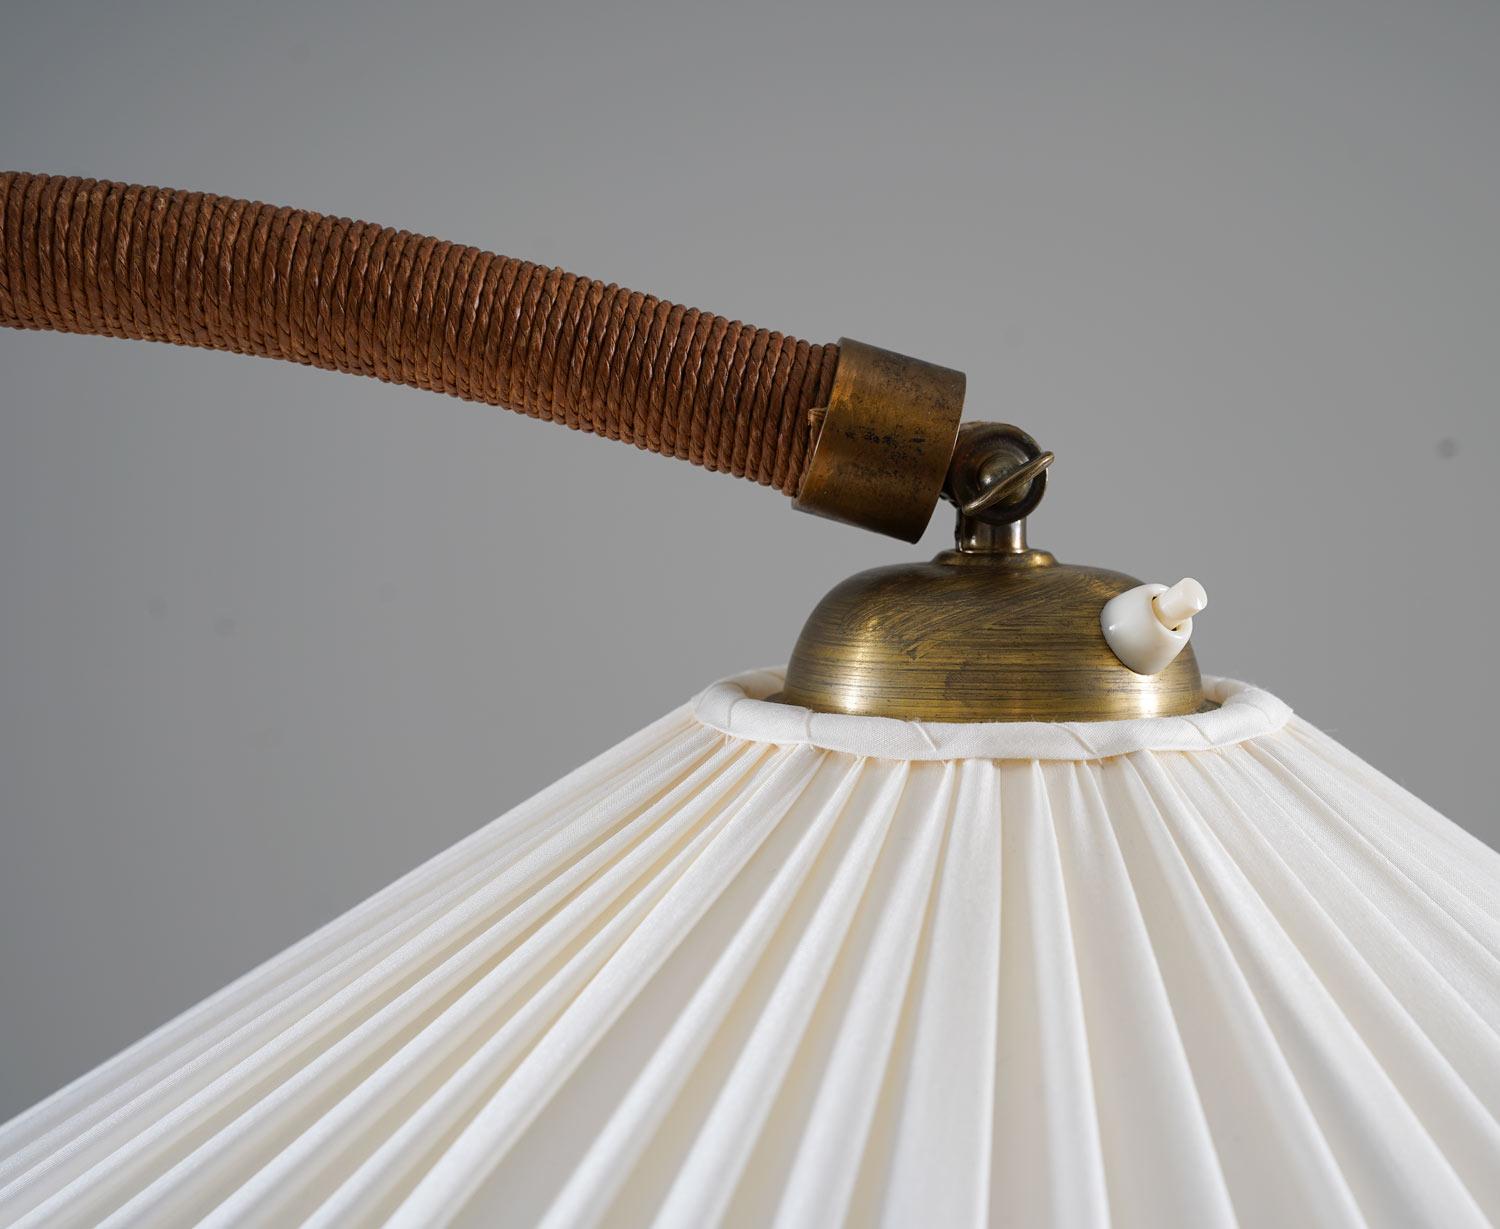 20th Century Swedish Art Deco Floor Lamp in Brass and Paper Cord Webbing